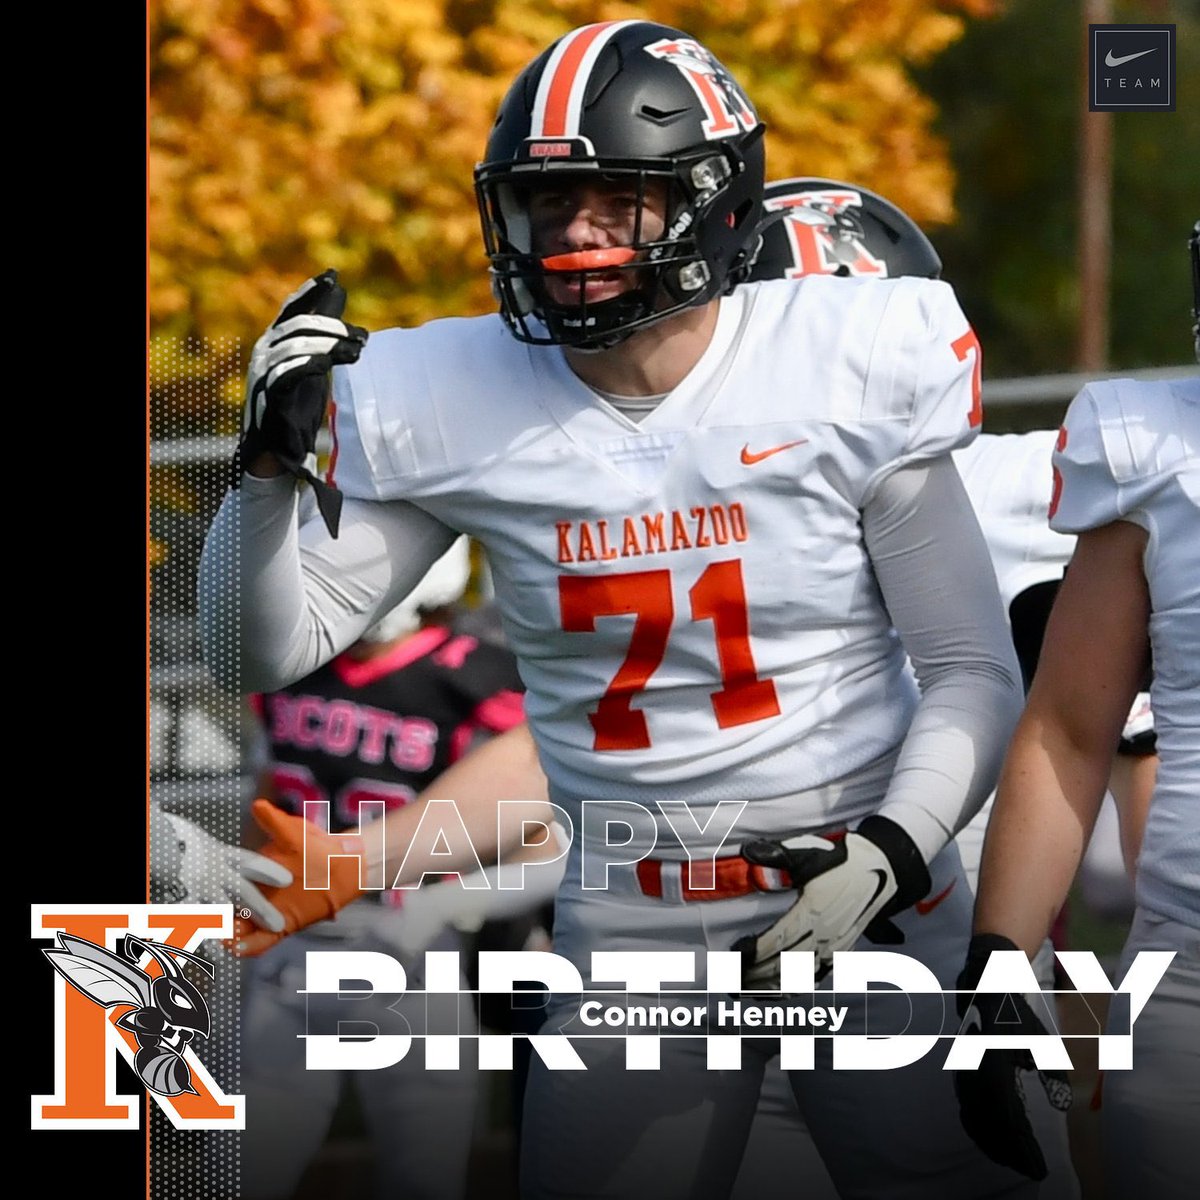 Please join us in wishing Connor Henney a happy birthday! #Birthday #SwarmTheDay